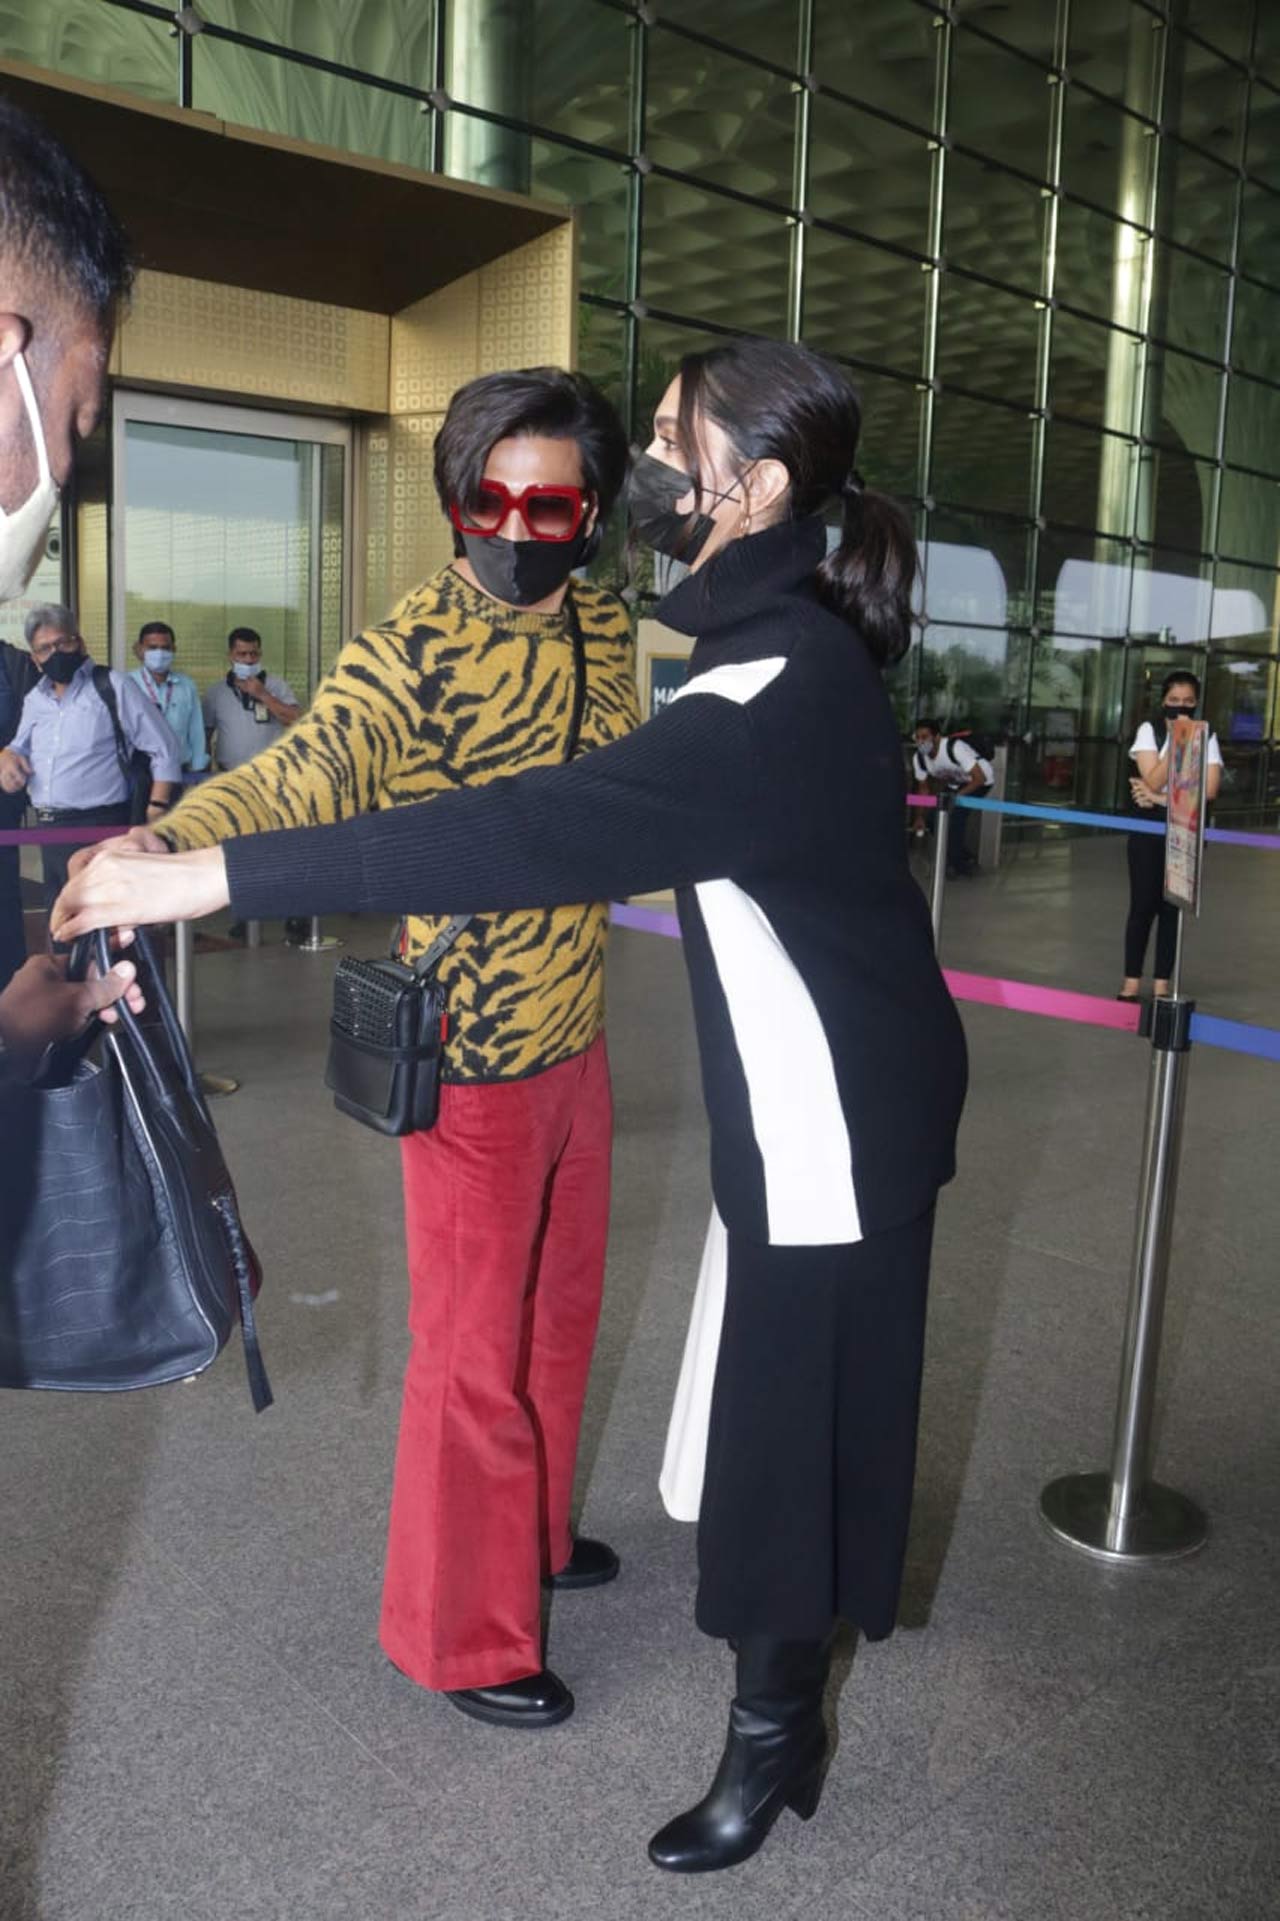 It was not just Ranveer Singh's outfit that caught our attention, but also when he was handing over his bag to one of his crew members, to get the best clicks from the shutterbugs.